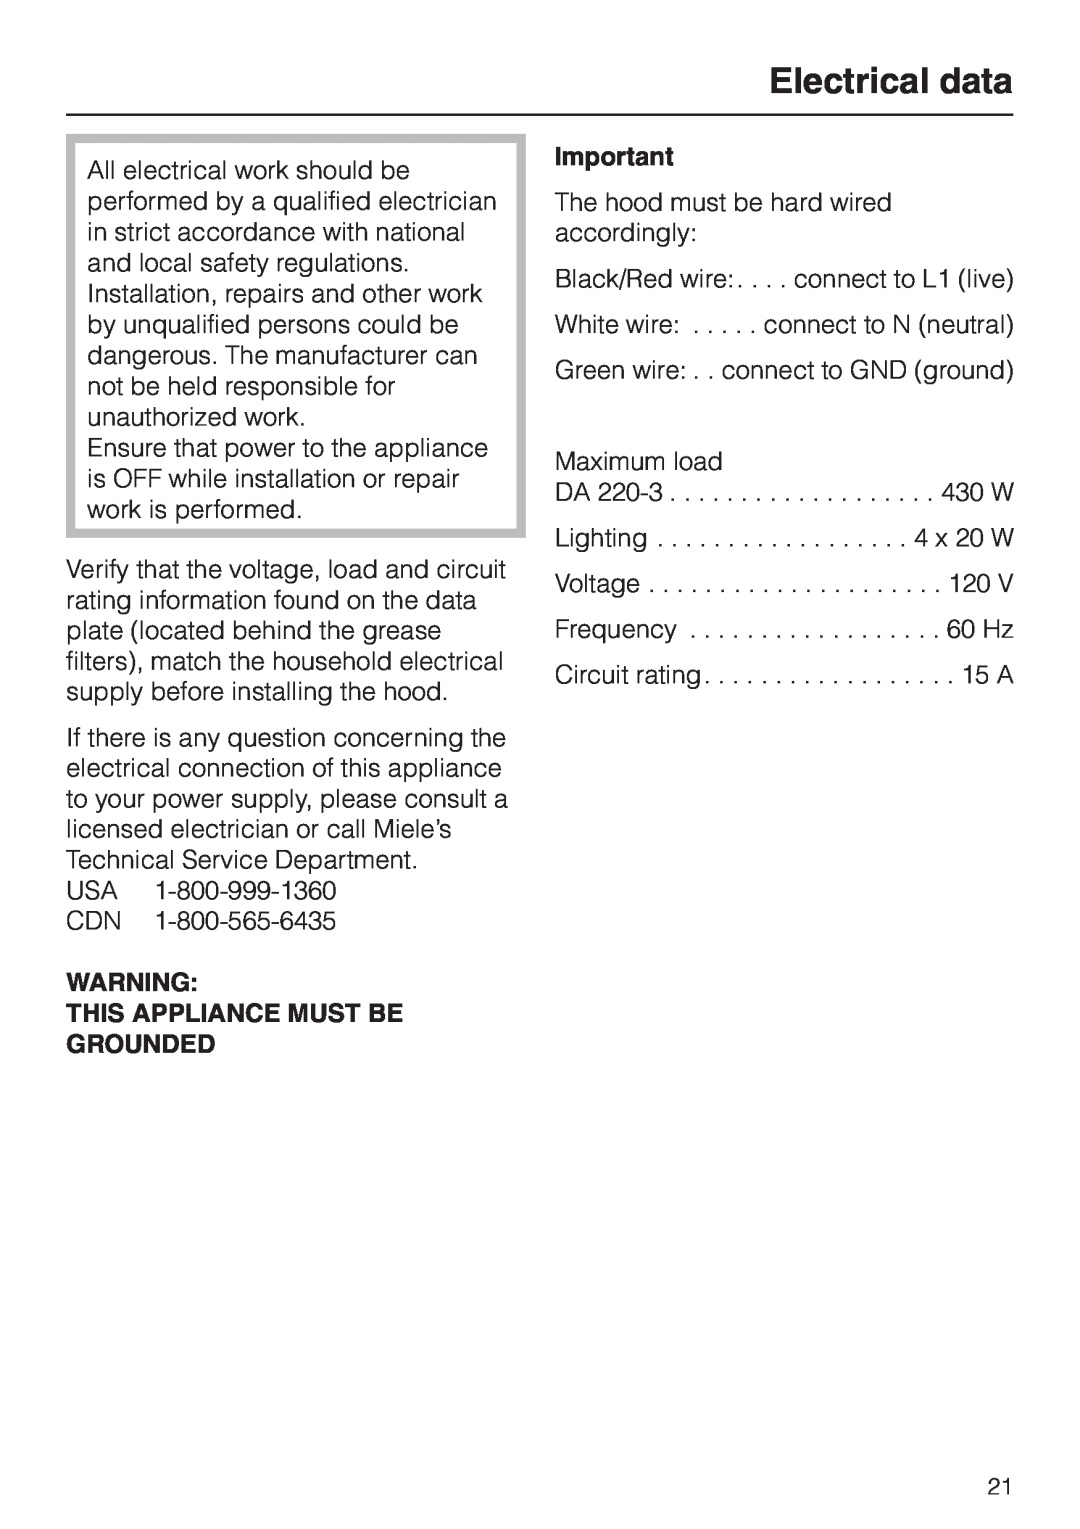 Miele DA220-3 installation instructions Electrical data, This Appliance Must Be Grounded 